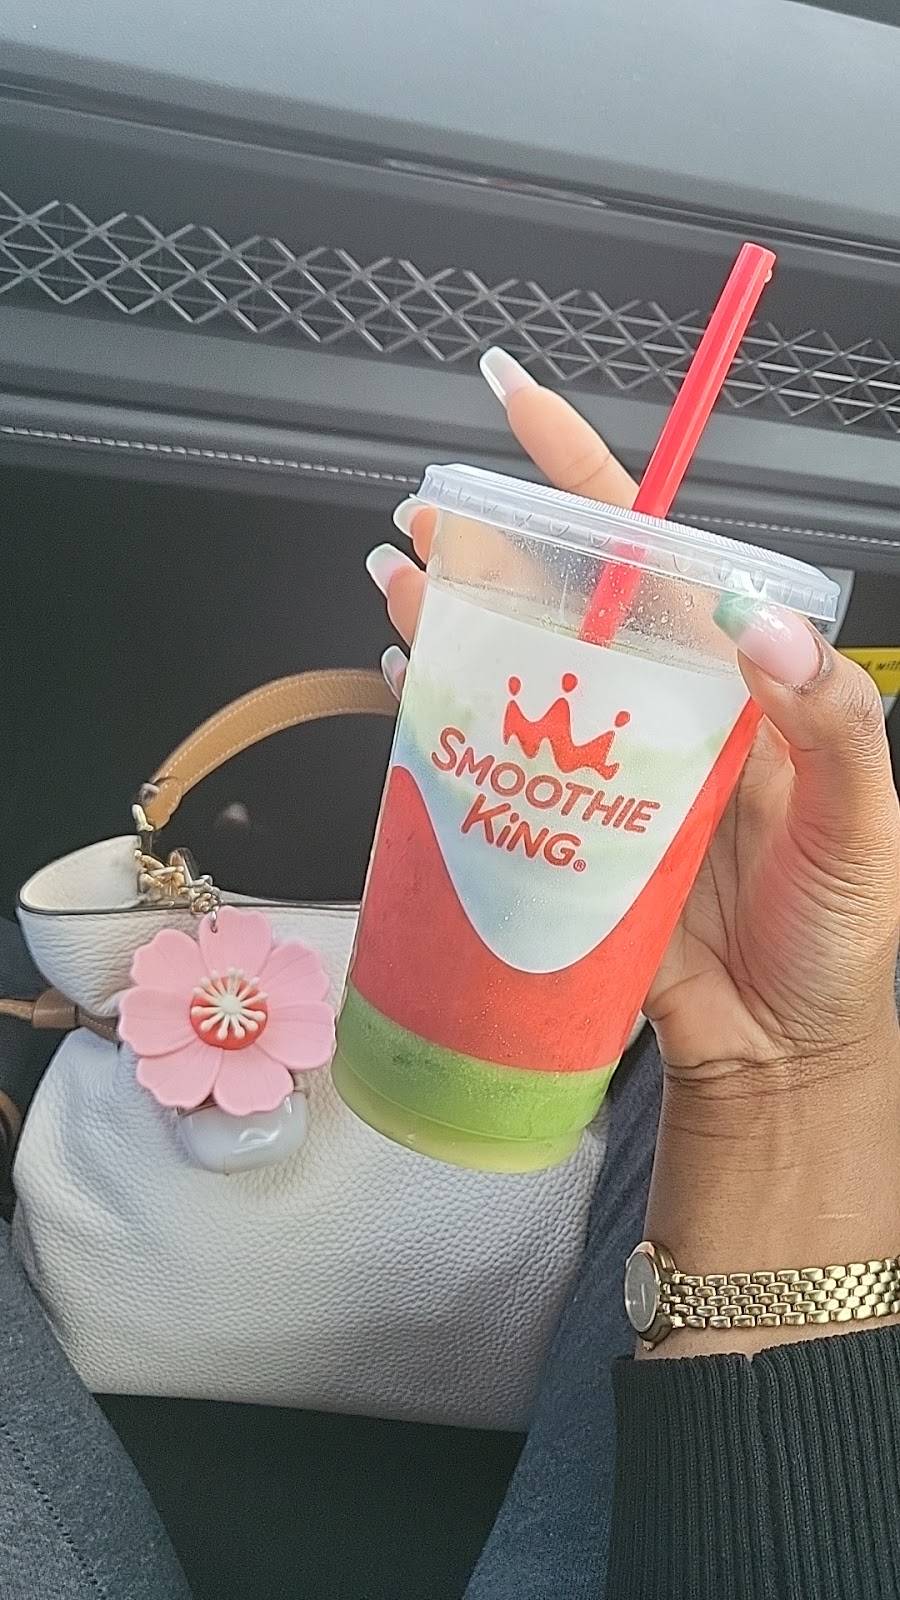 Smoothie King | 610 Broadhollow Rd # 5, Melville, NY 11747 | Phone: (631) 390-8606